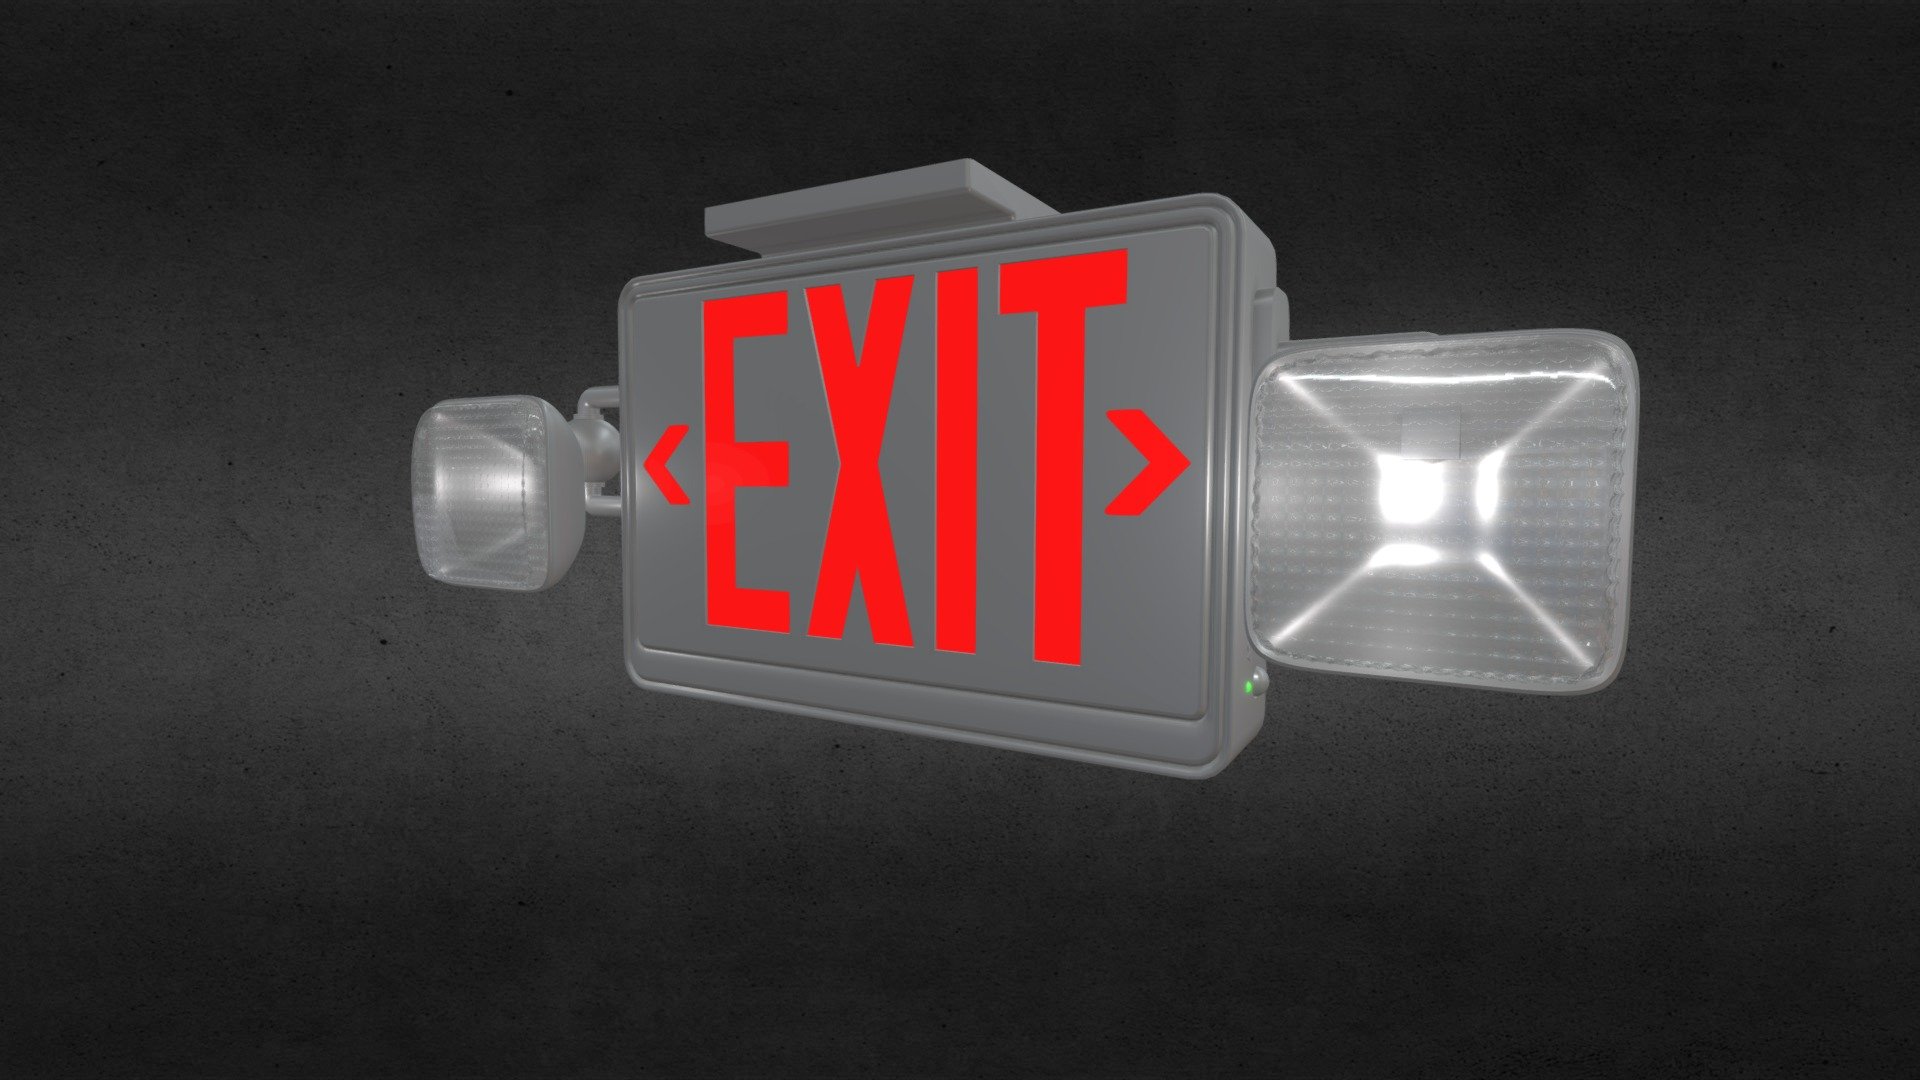 Illuminated &lsquo;Exit' sign based on an actual existing product. Directs building occupants toward doors for exit with battery backup lighting during power failure. Used generally in public establishments, schools, hospitals, commercial and municipal buildings, Blender cycles 2.79b and cycles render engine 3d model